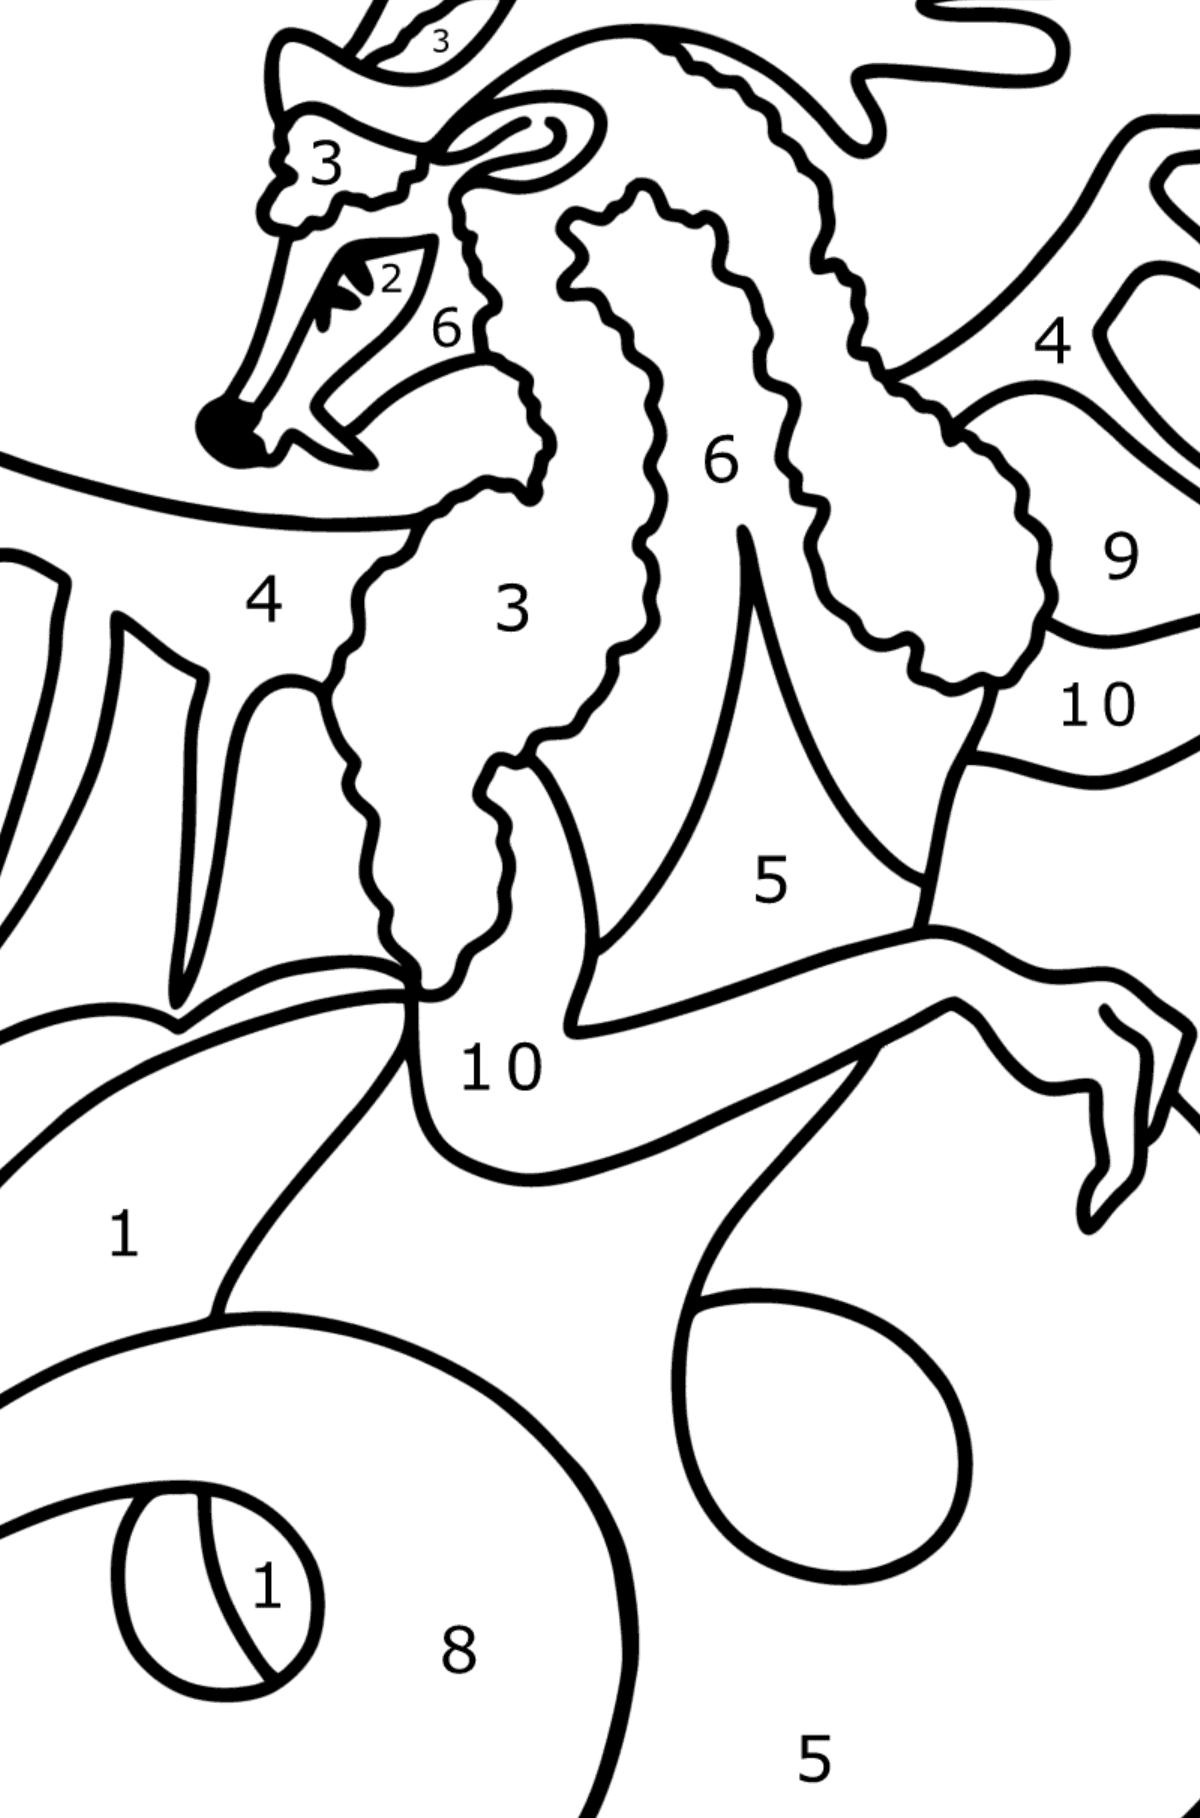 Beautiful Dragon coloring page - Coloring by Numbers for Kids